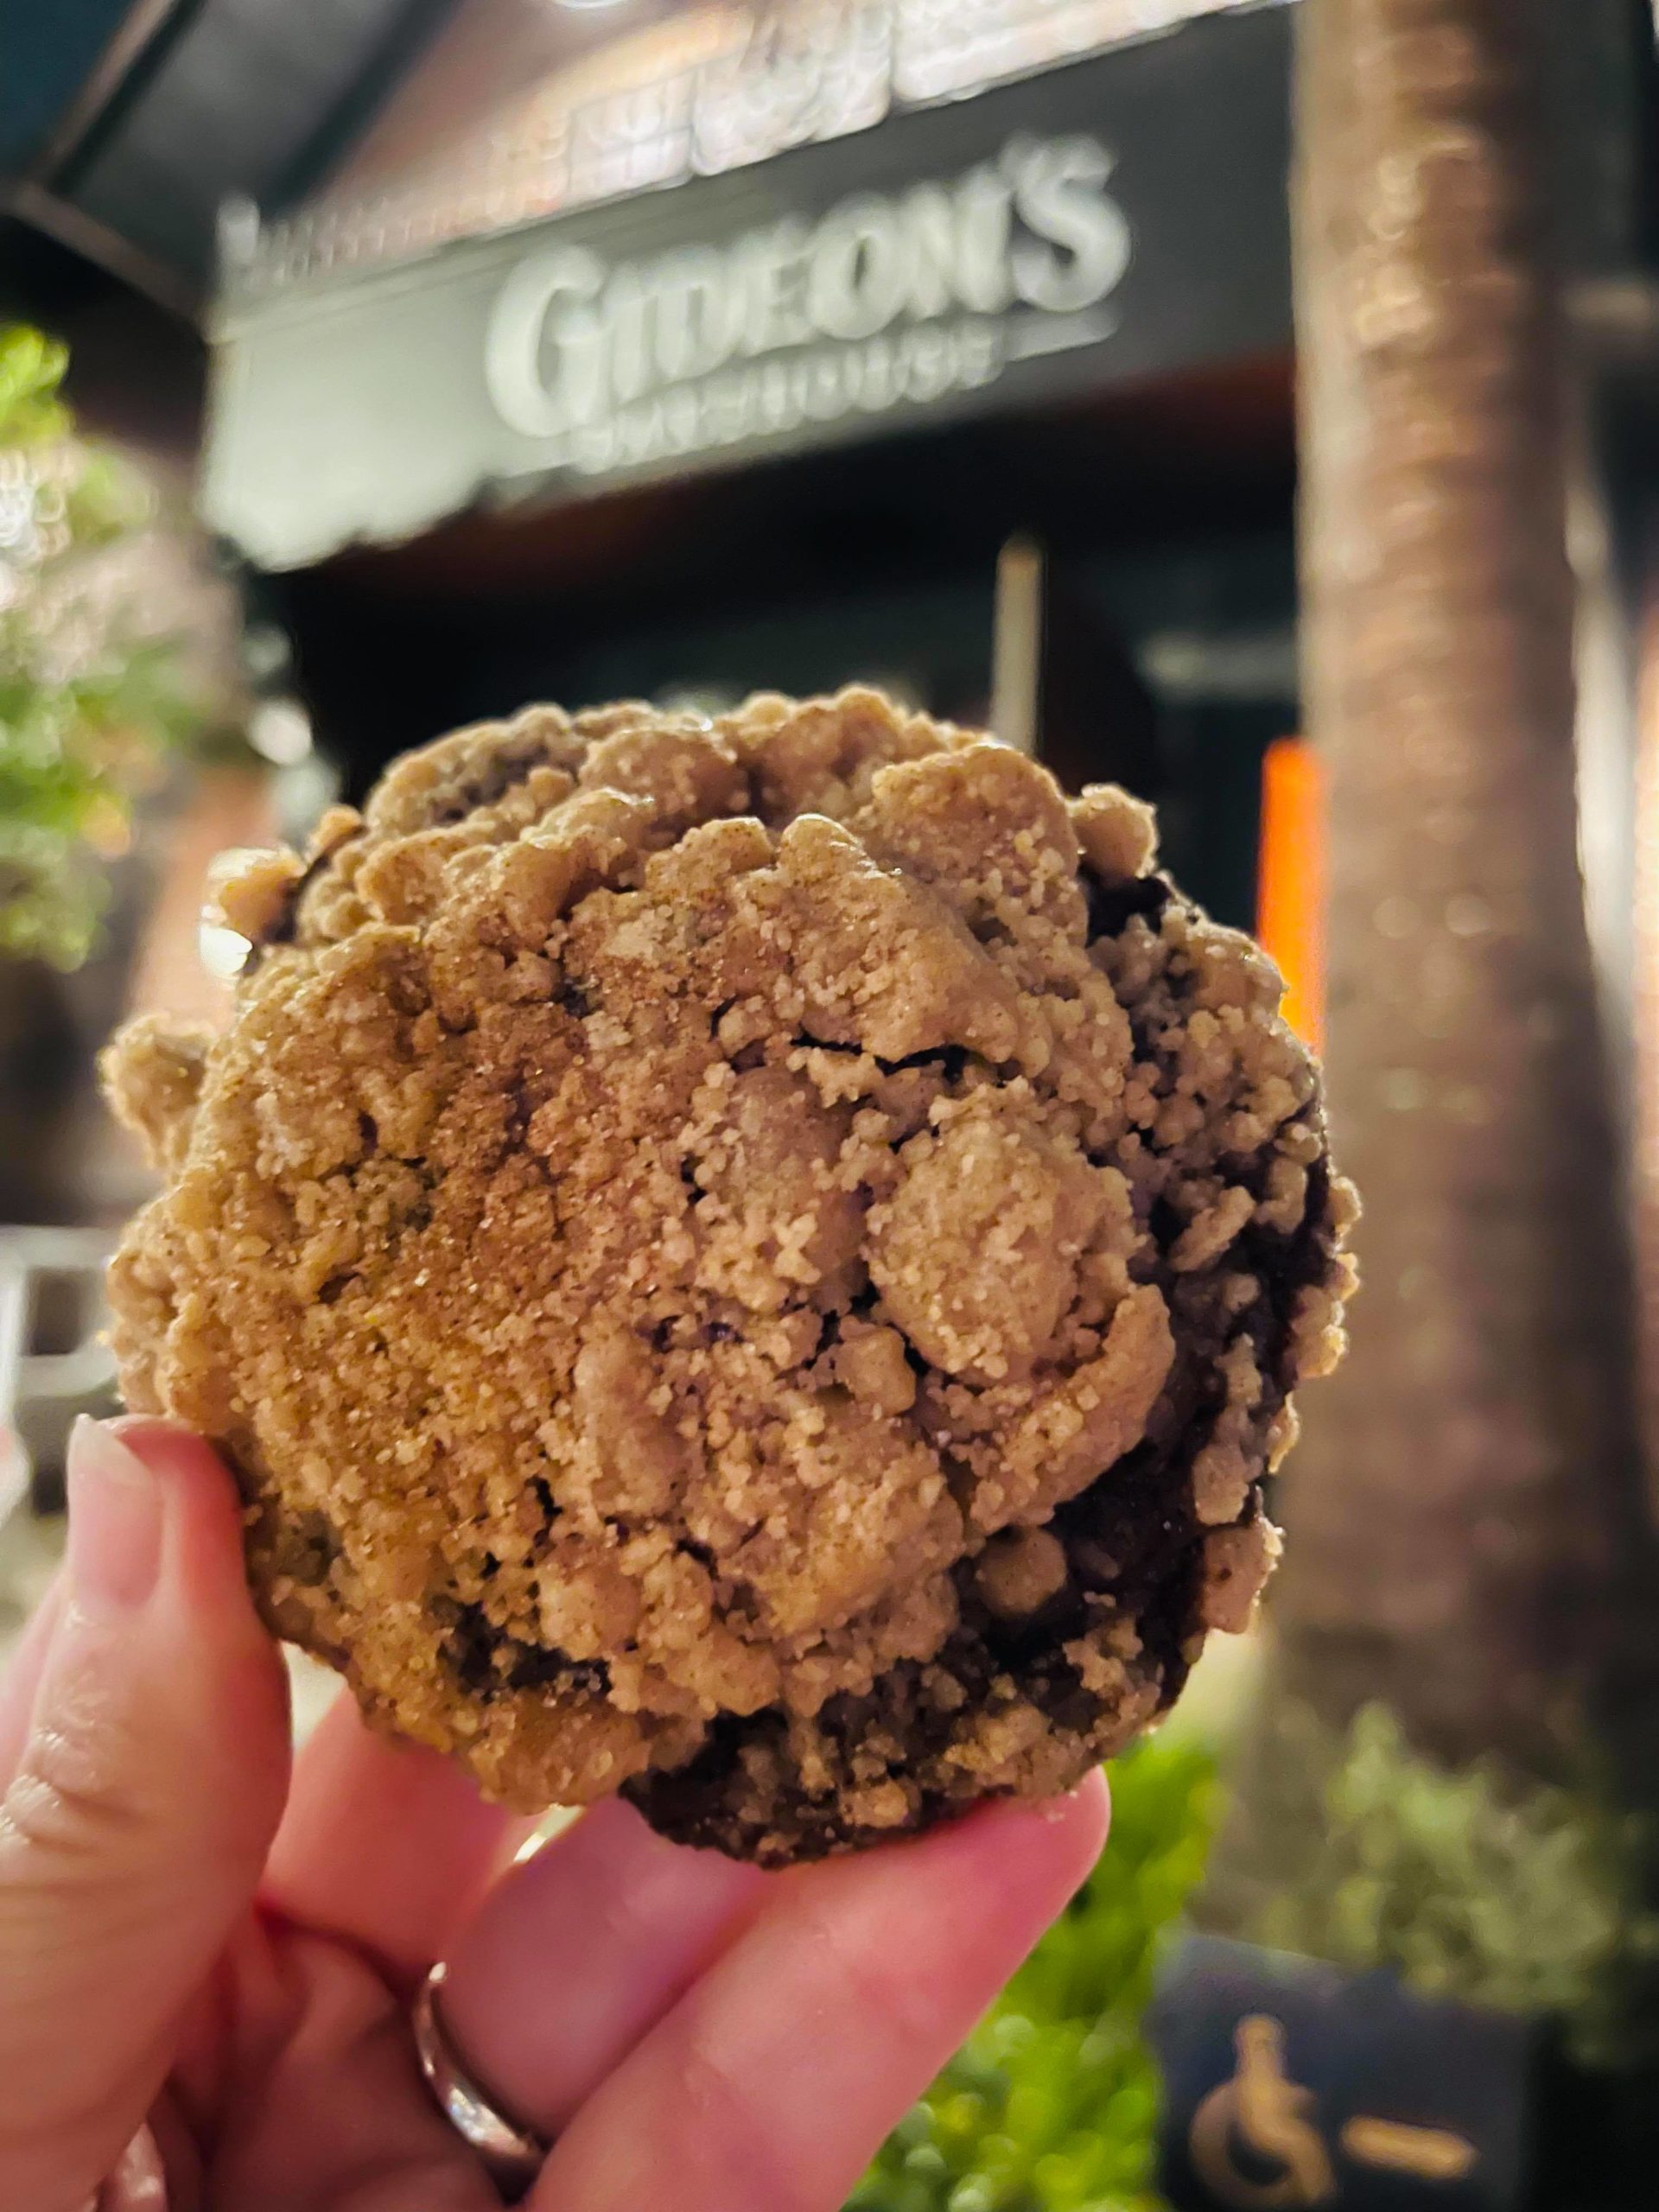 FIRST LOOK Gideon's Debuts New Evening Cookie